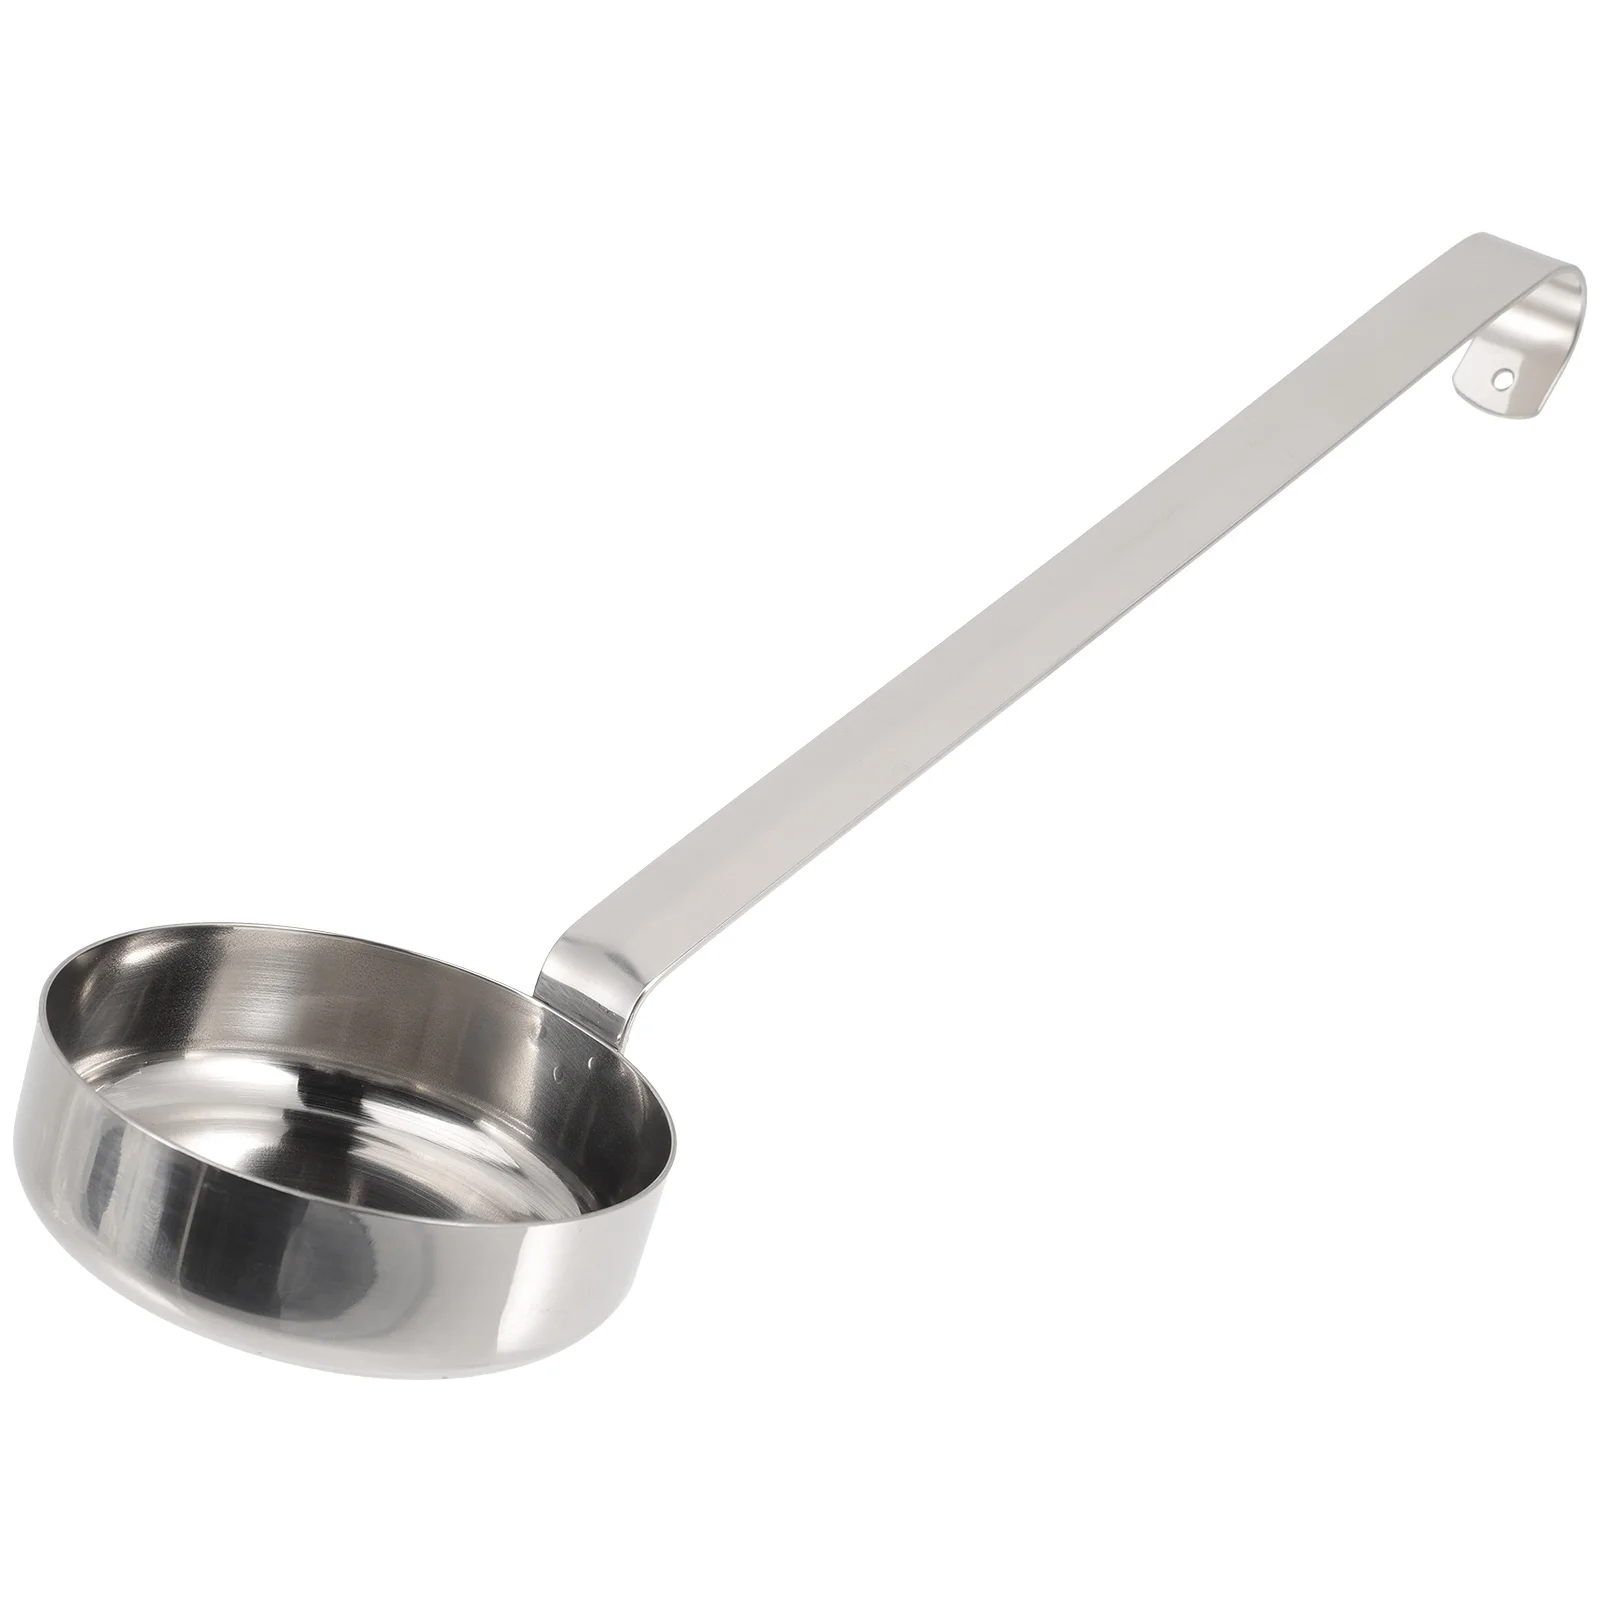 

Stainless Steel Pizza Sauce Spoon Soup Ladle Serving Spoon Flat Bottom Measuring Scoop Cooking Spoon Kitchen Tools